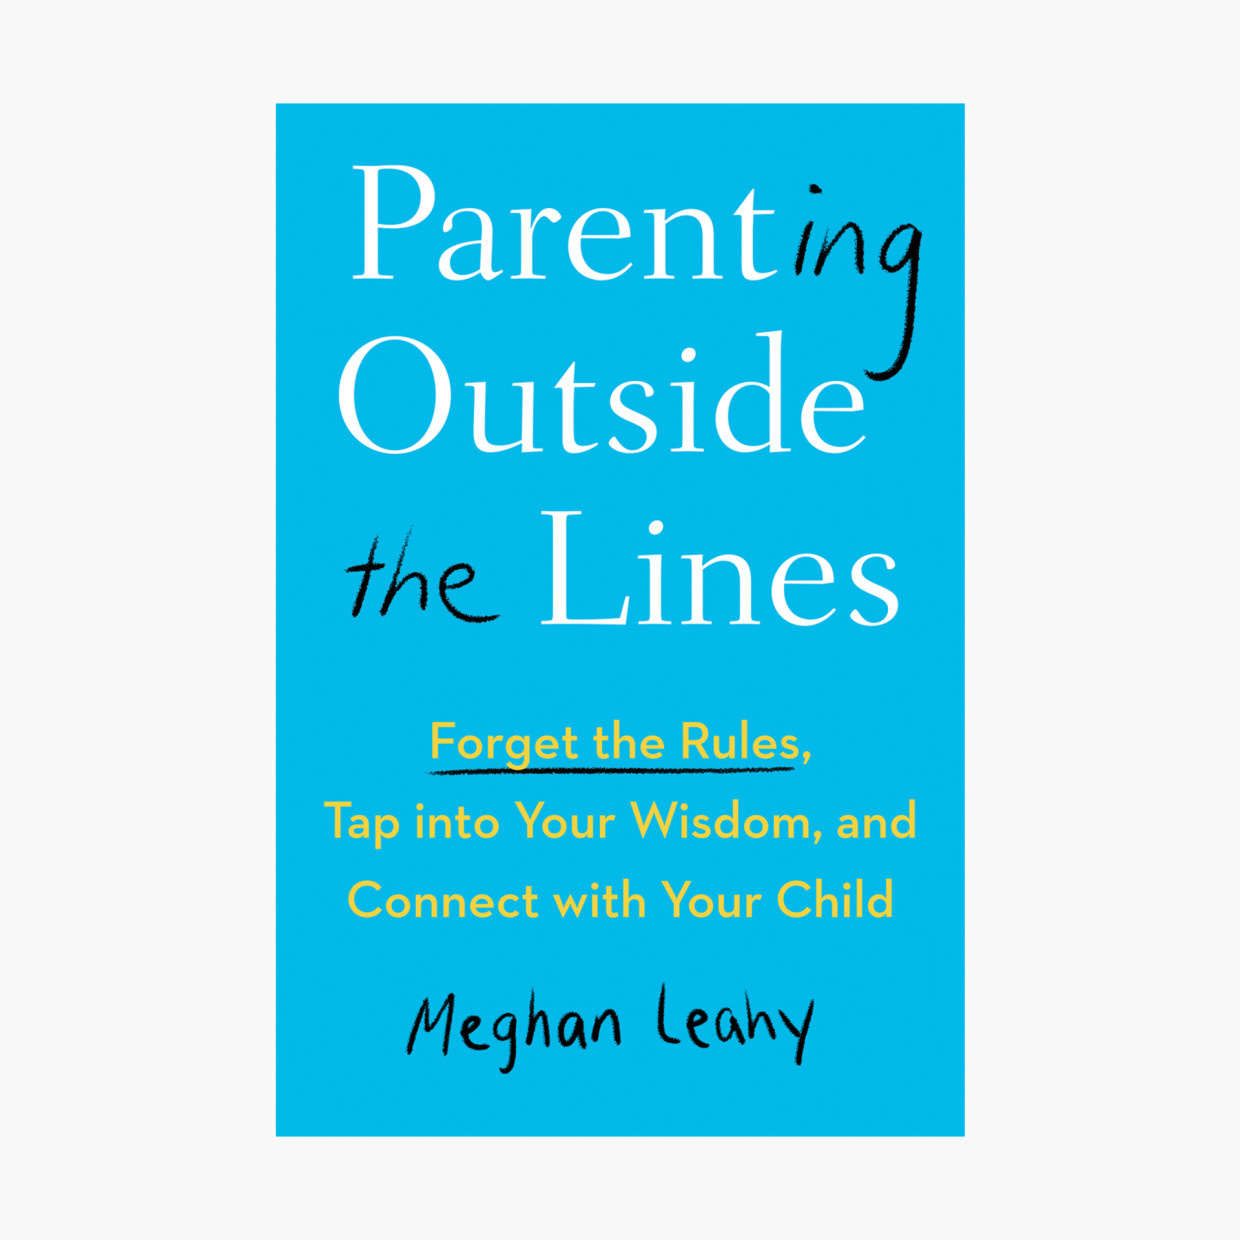 Parenting Outside The Lines: Forget the Rules, Tap into Your Wisdom, and Connect with Your Child.